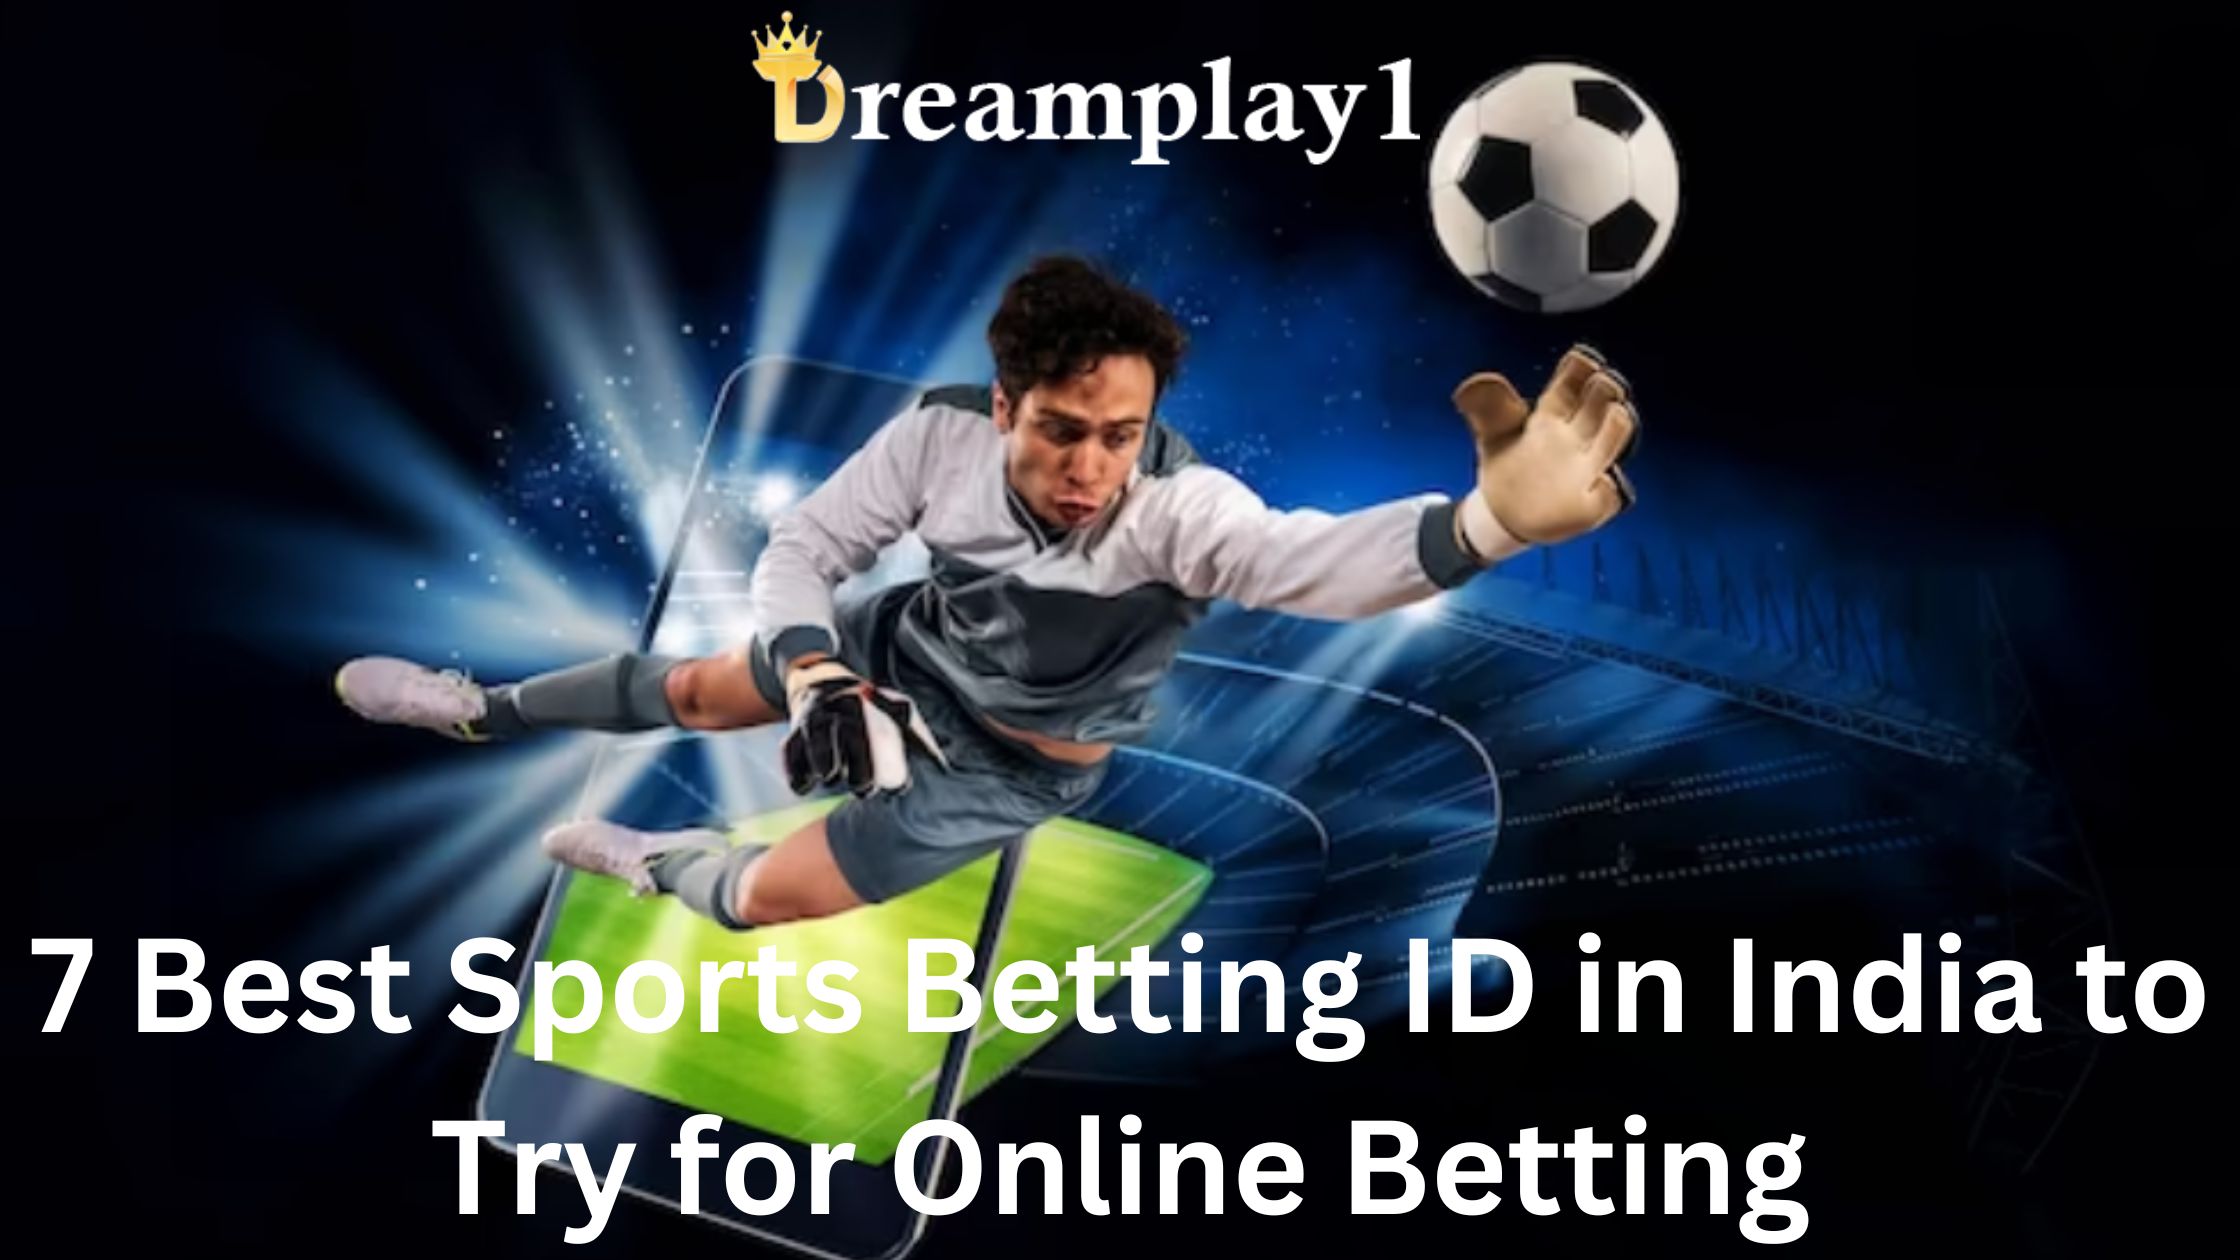 7 Best Sports Betting ID in India to Try for Online Betting